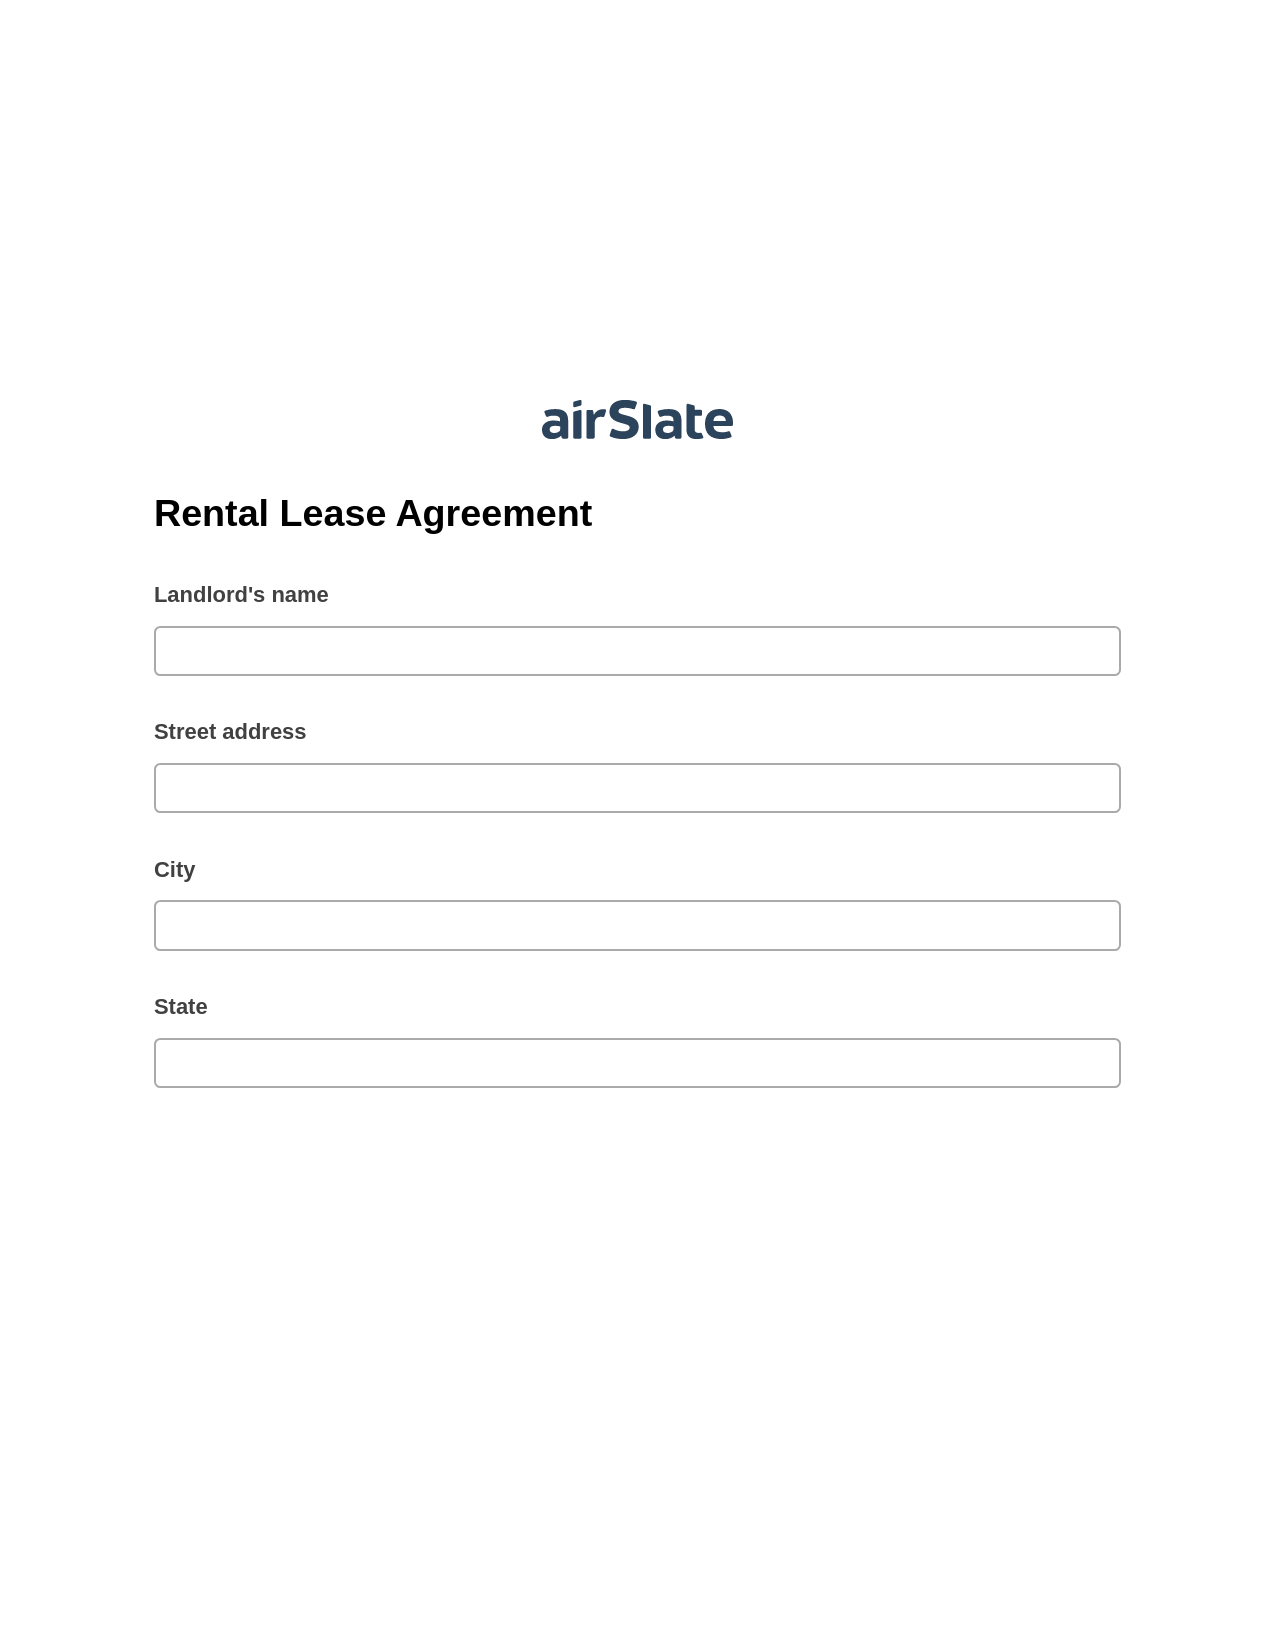 Rental Lease Agreement Pre-fill from CSV File Dropdown Options Bot, Jira Bot, Export to Salesforce Bot